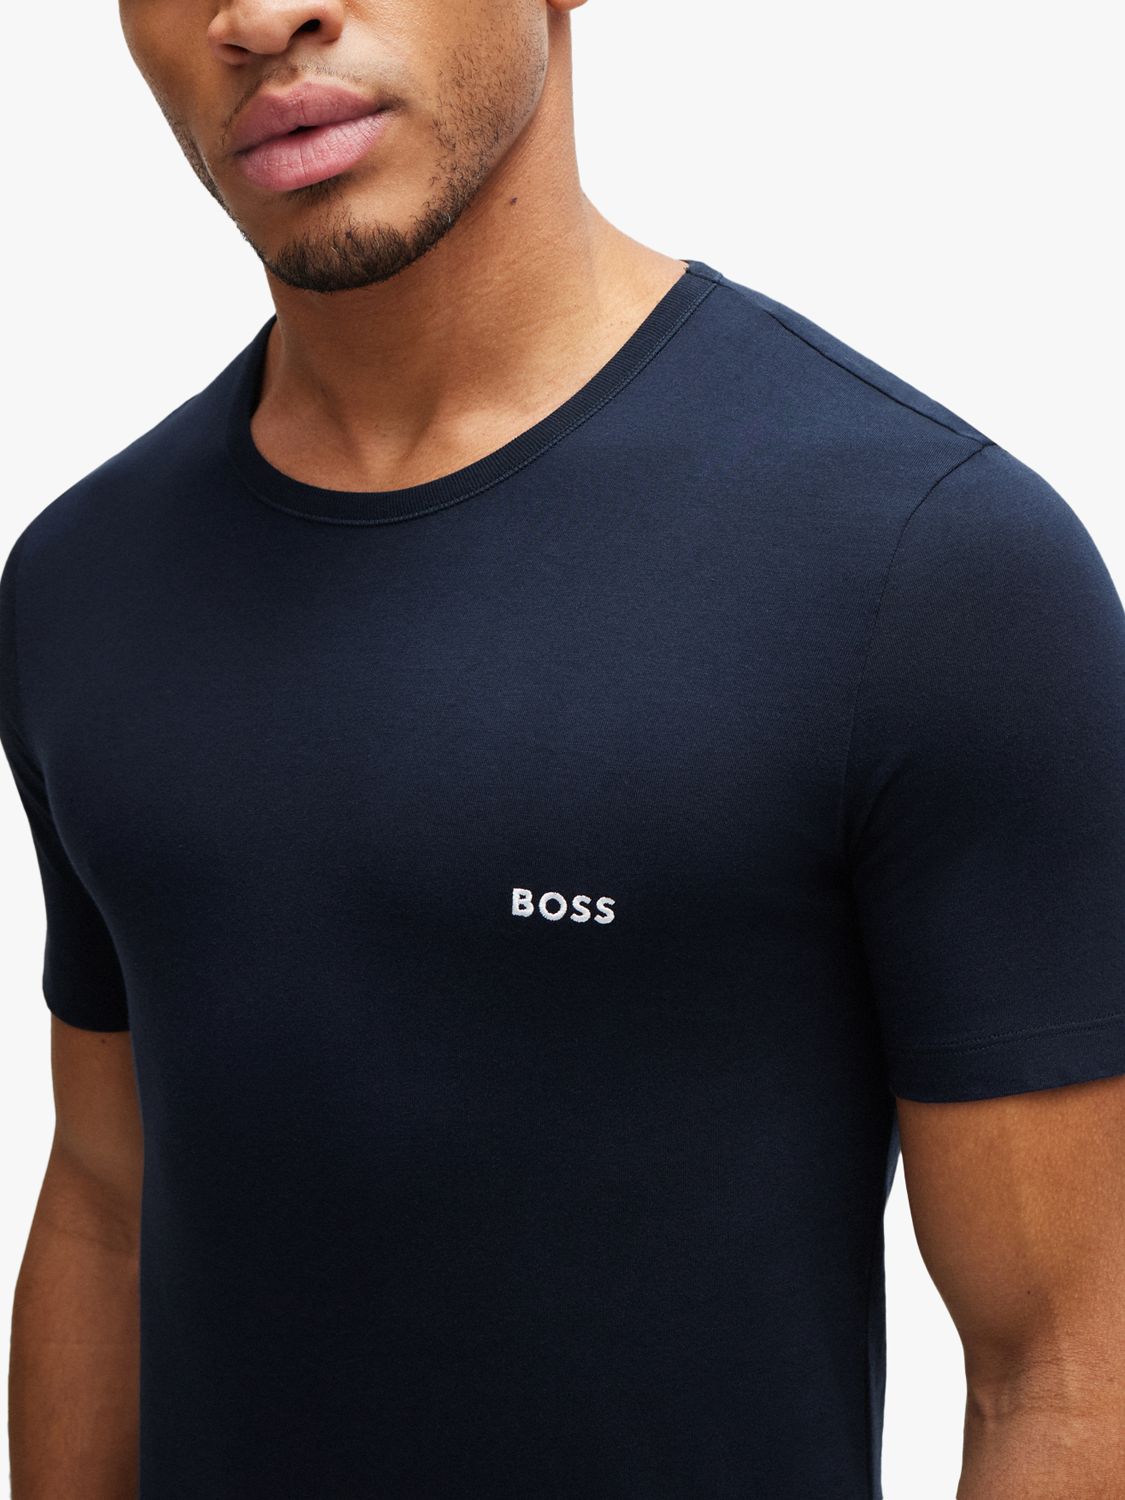 BOSS Essential Style Classic Bodywear T-Shirt, Pack of 3, Blue Multi, M